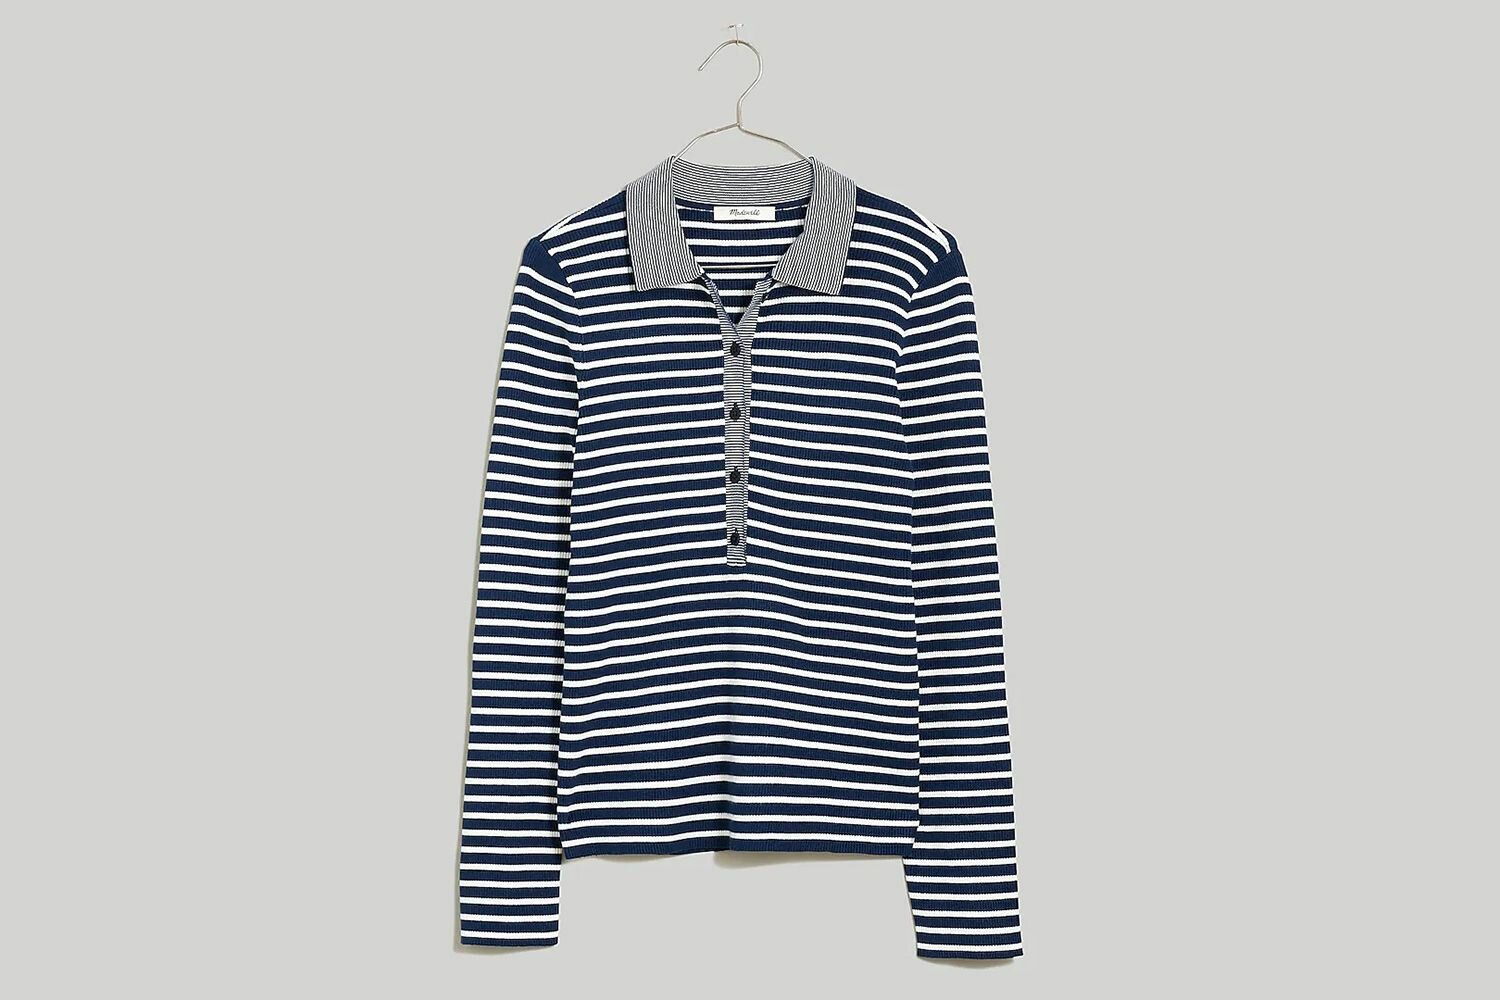 Madewell The Signature Knit Polo Sweater Top in Stripe